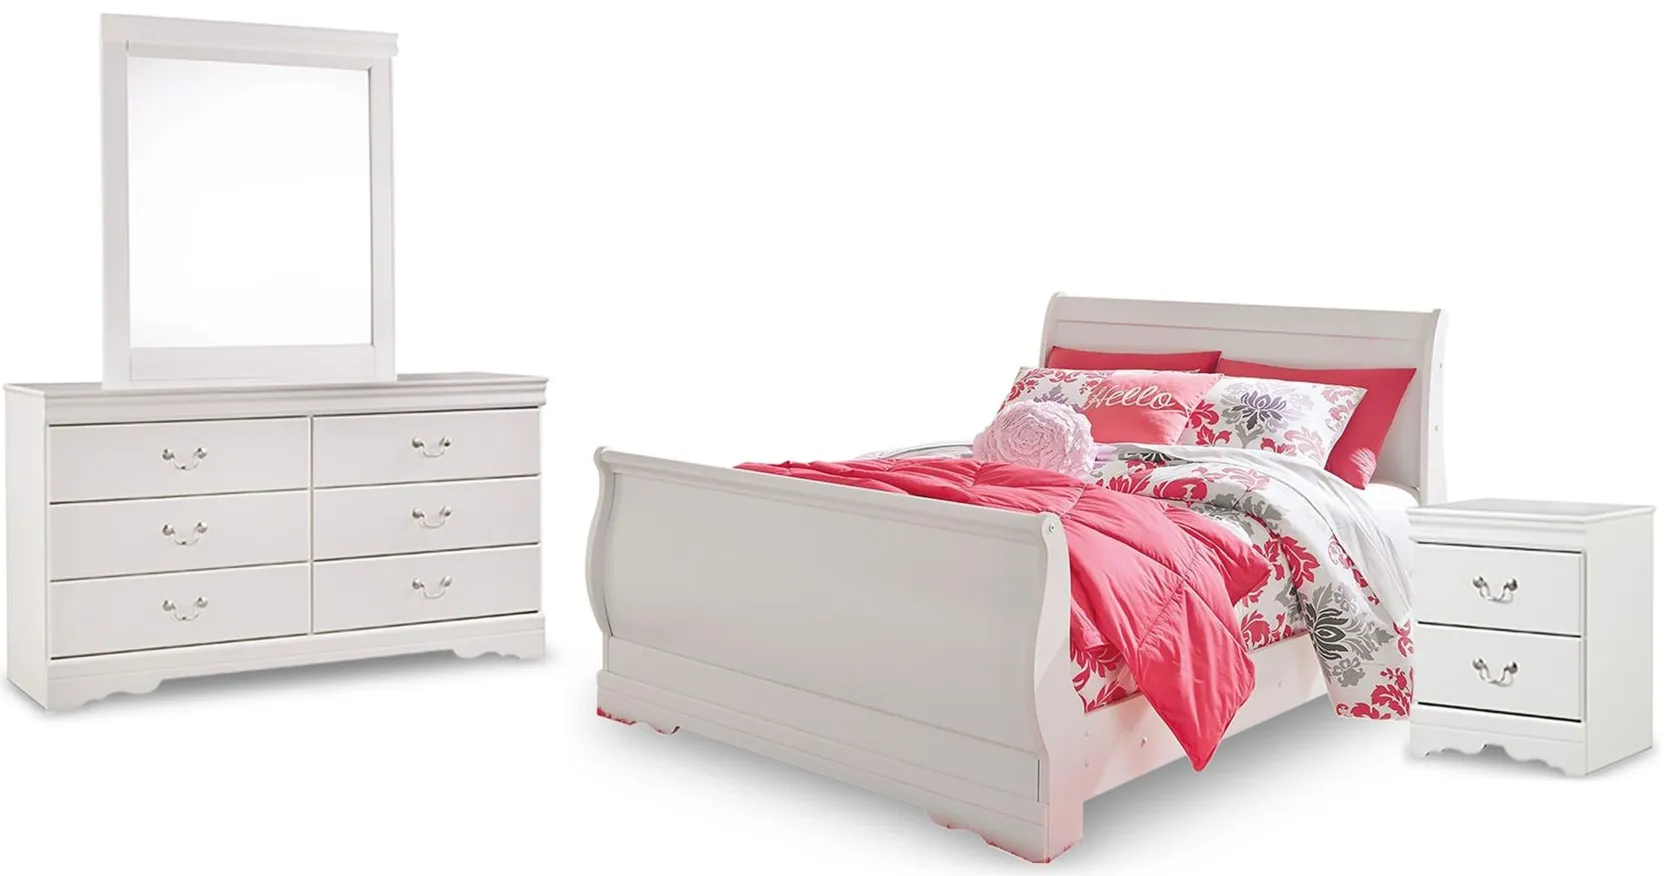 Anarasia 4-pc. Bedroom Set in White by Ashley Furniture